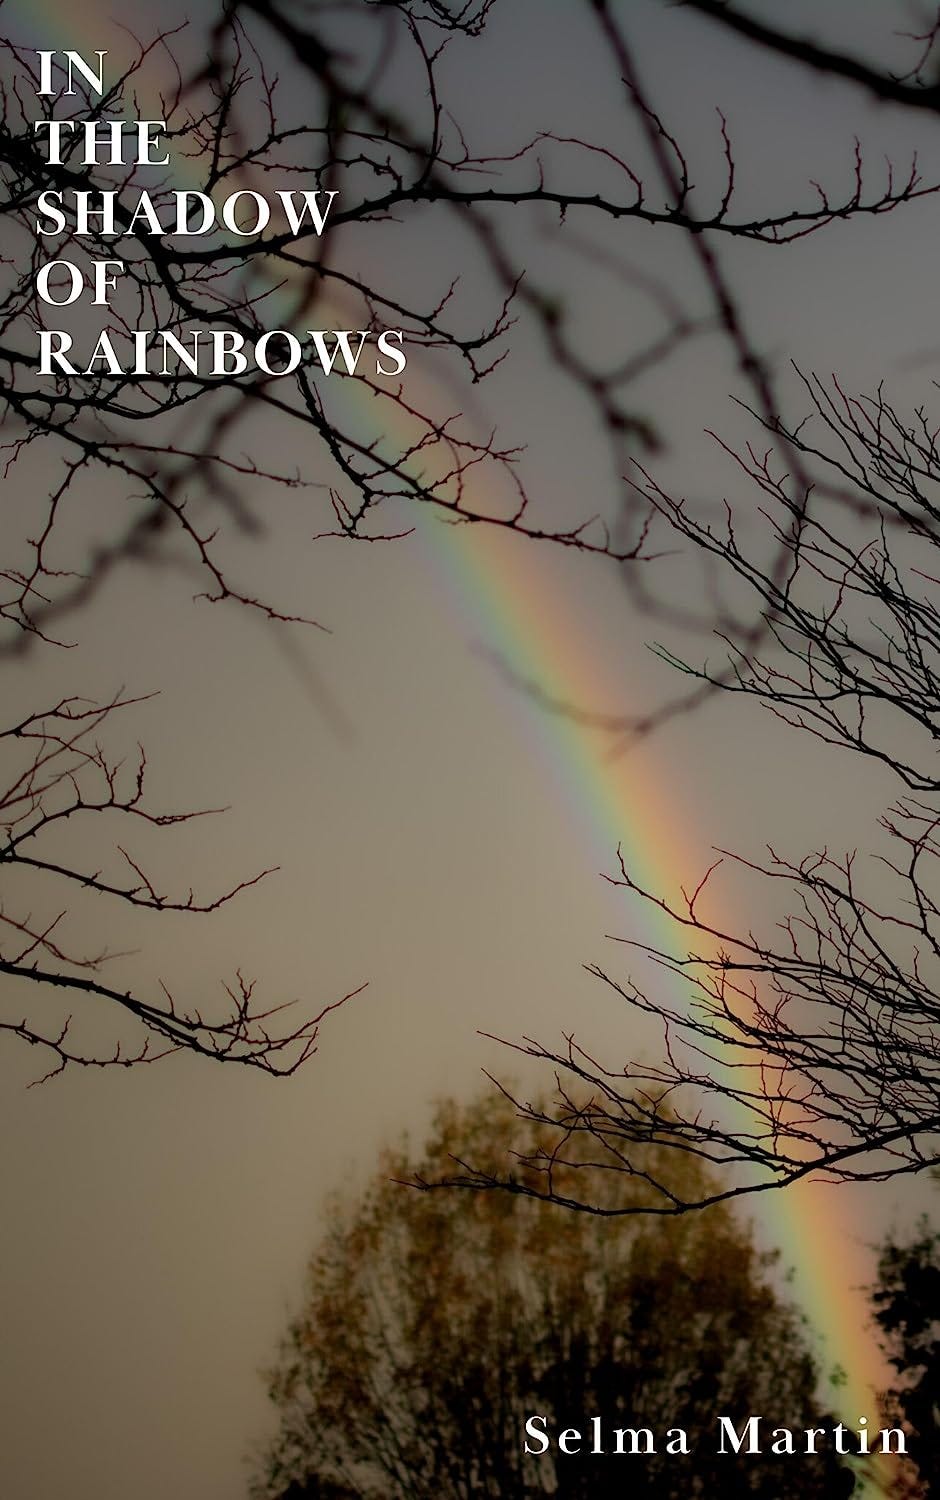 Book cover of In the Shadow of Rainbows by Selma Martin. The photo cover shows a rainbow with the atree and bare branches in the foreground.